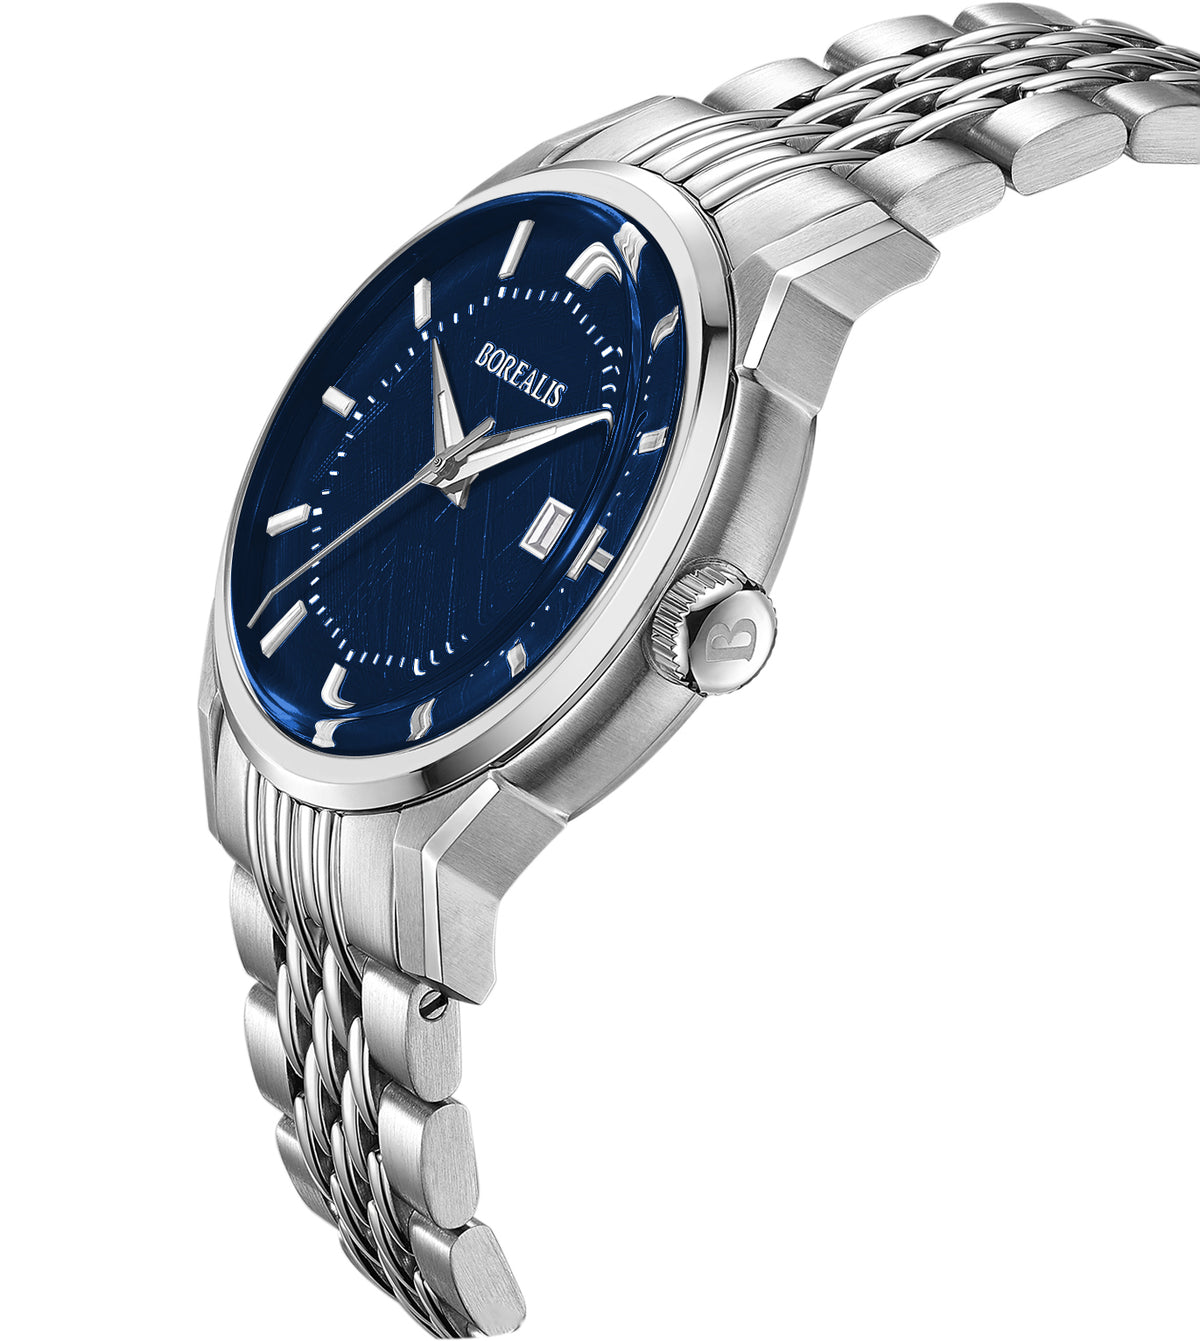 Borealis Lusitano Blue Dial : A Chronicle of Time, Elegance, and Precision